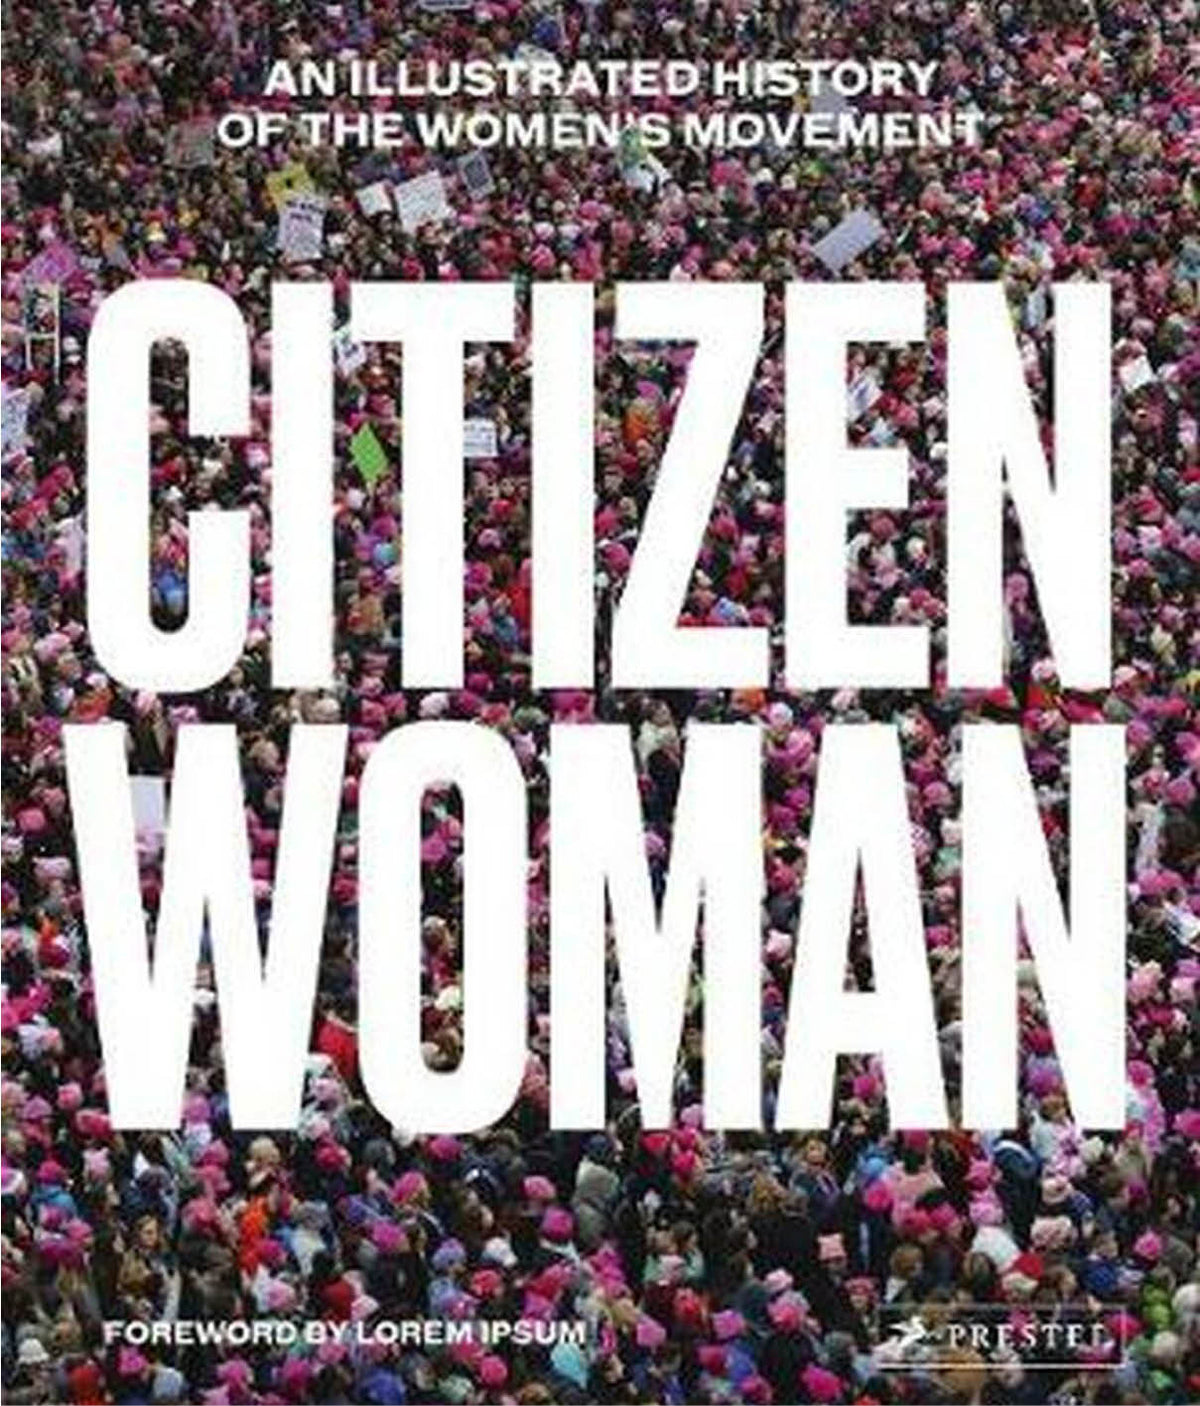 Citizen Woman: An Illustrated History of the Women’s Movement by Jane Gerhard and Dan Tucker